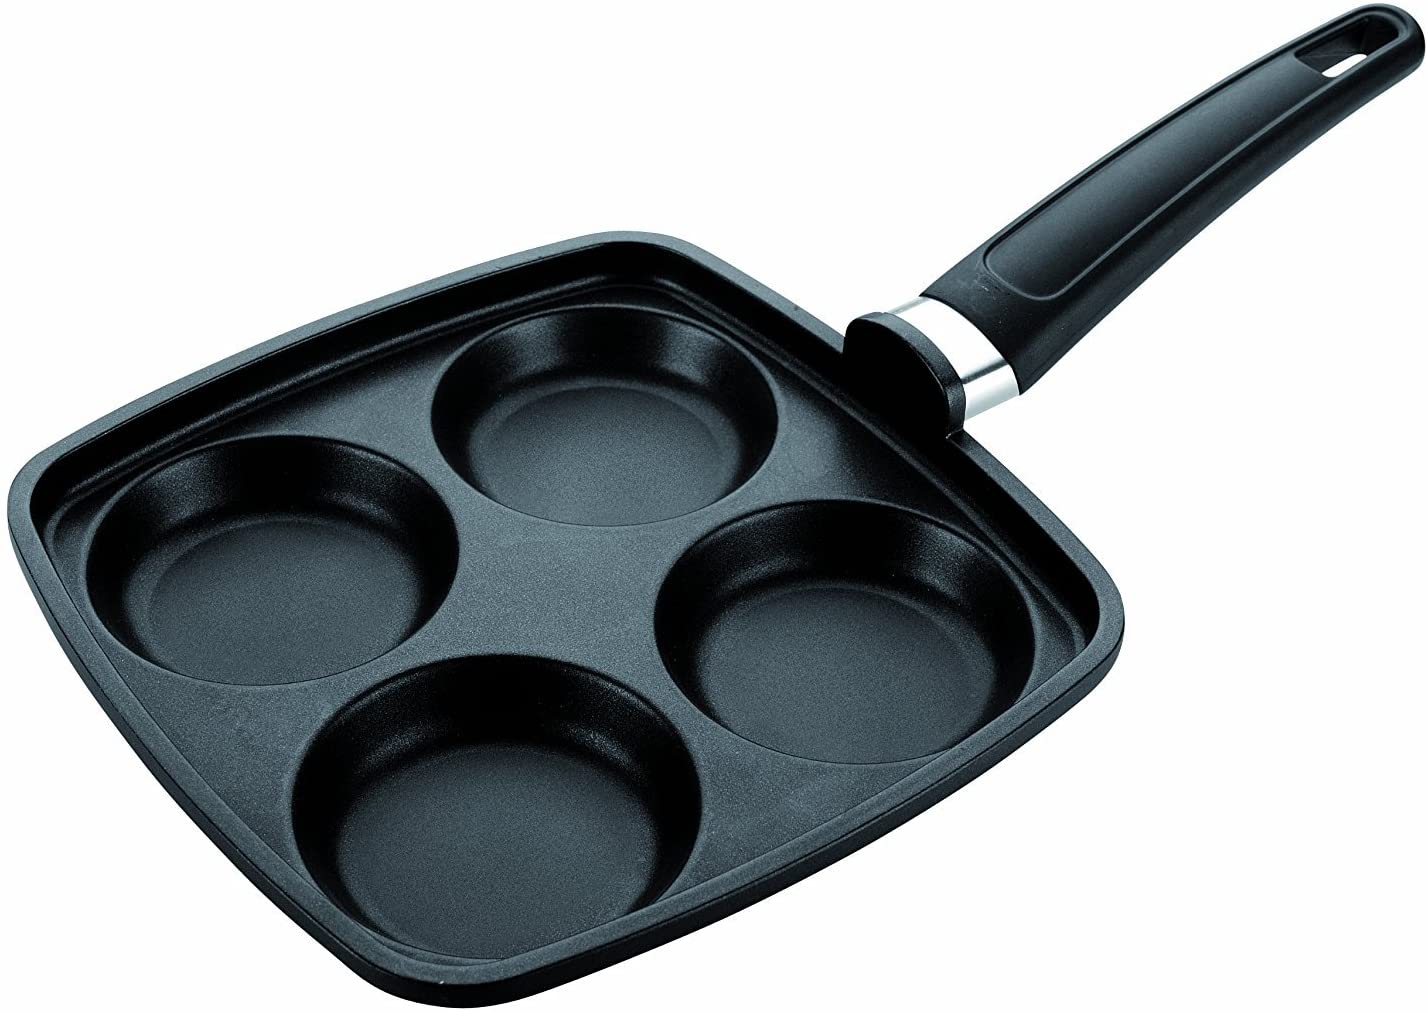 Tescoma Premium 22 x 22 cm Frying Pan with 4 Dimples